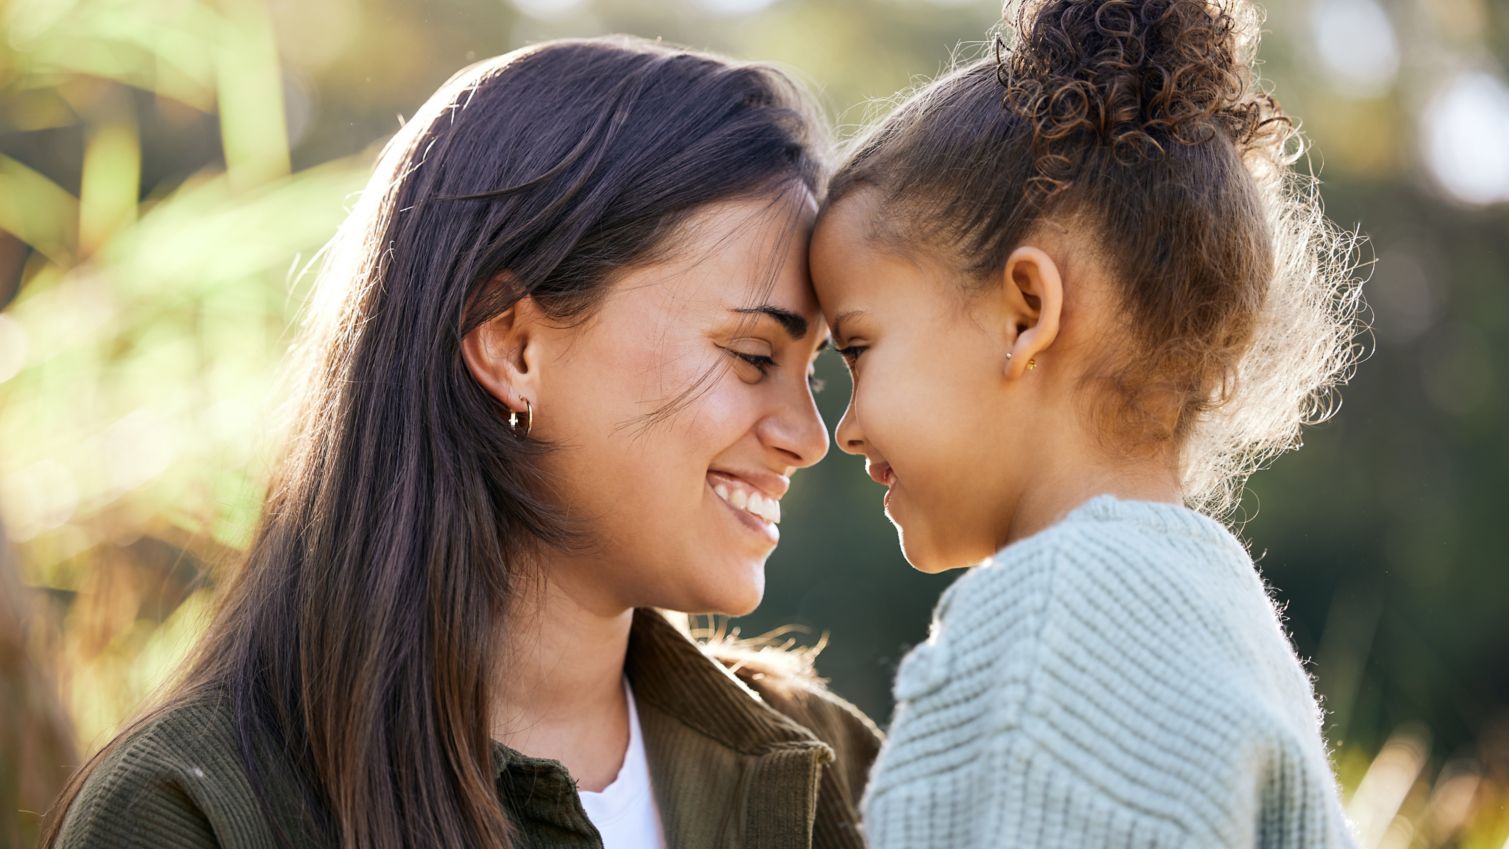 Mom holding daughter touching foreheads smiling while outside